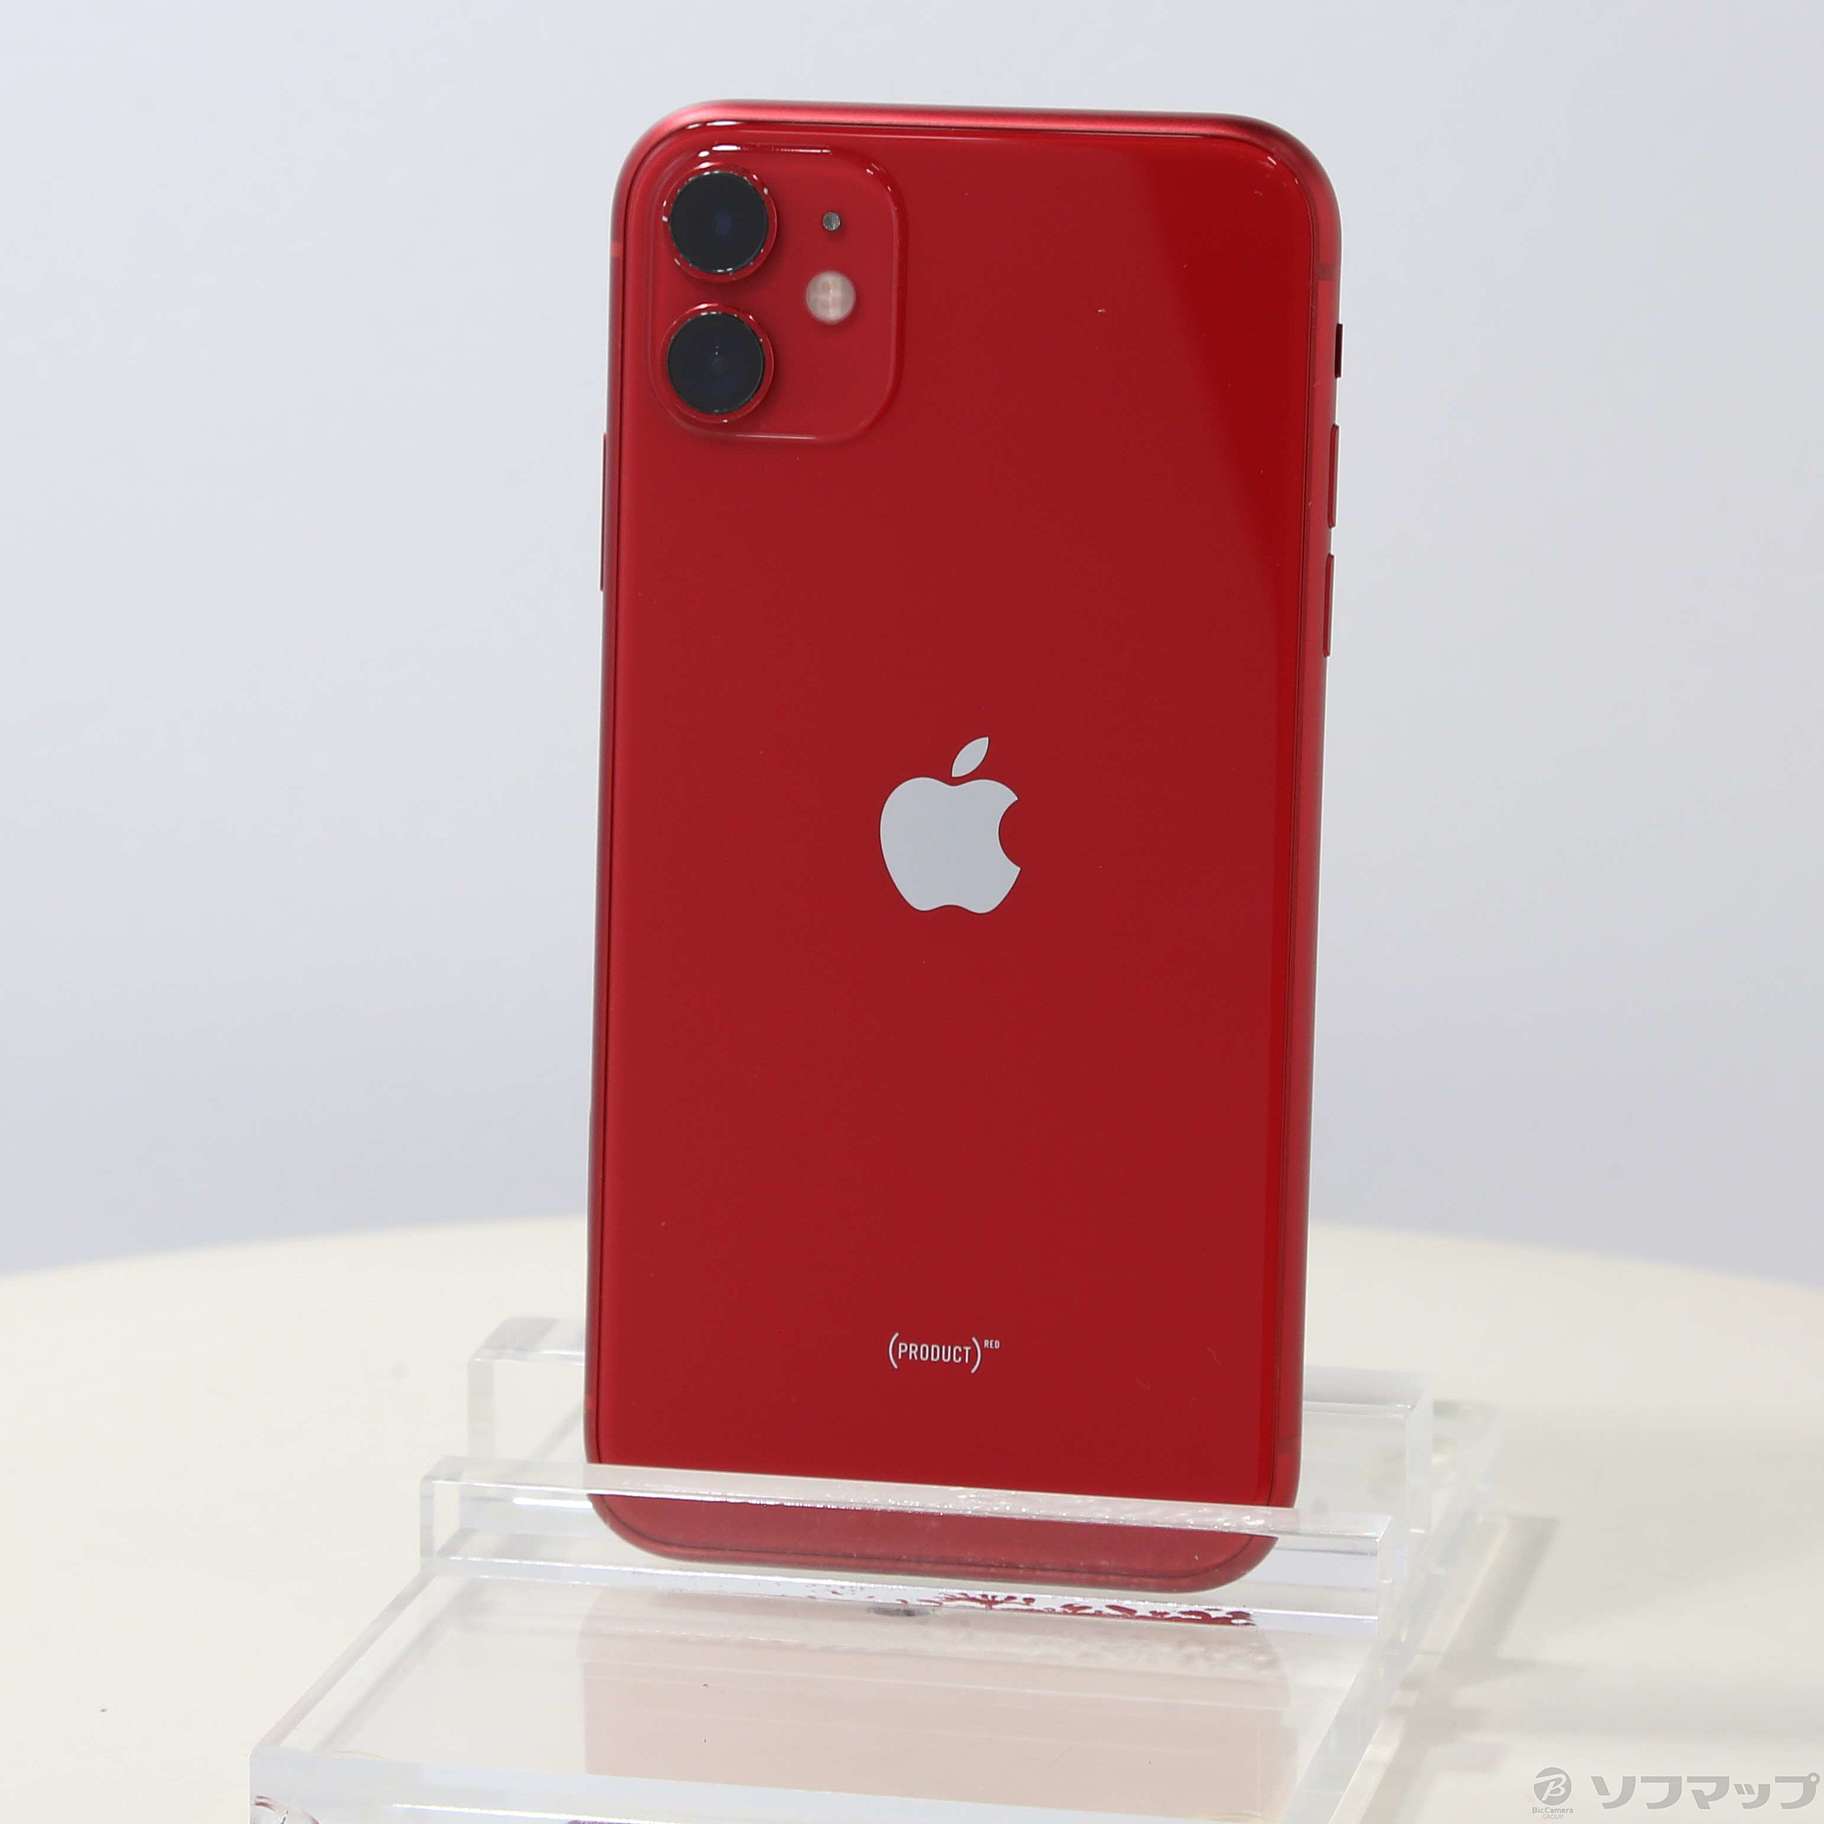 IPhone 11 (PRODUCT)RED 128 GB SIMフリージャンク 携帯電話 | red ...